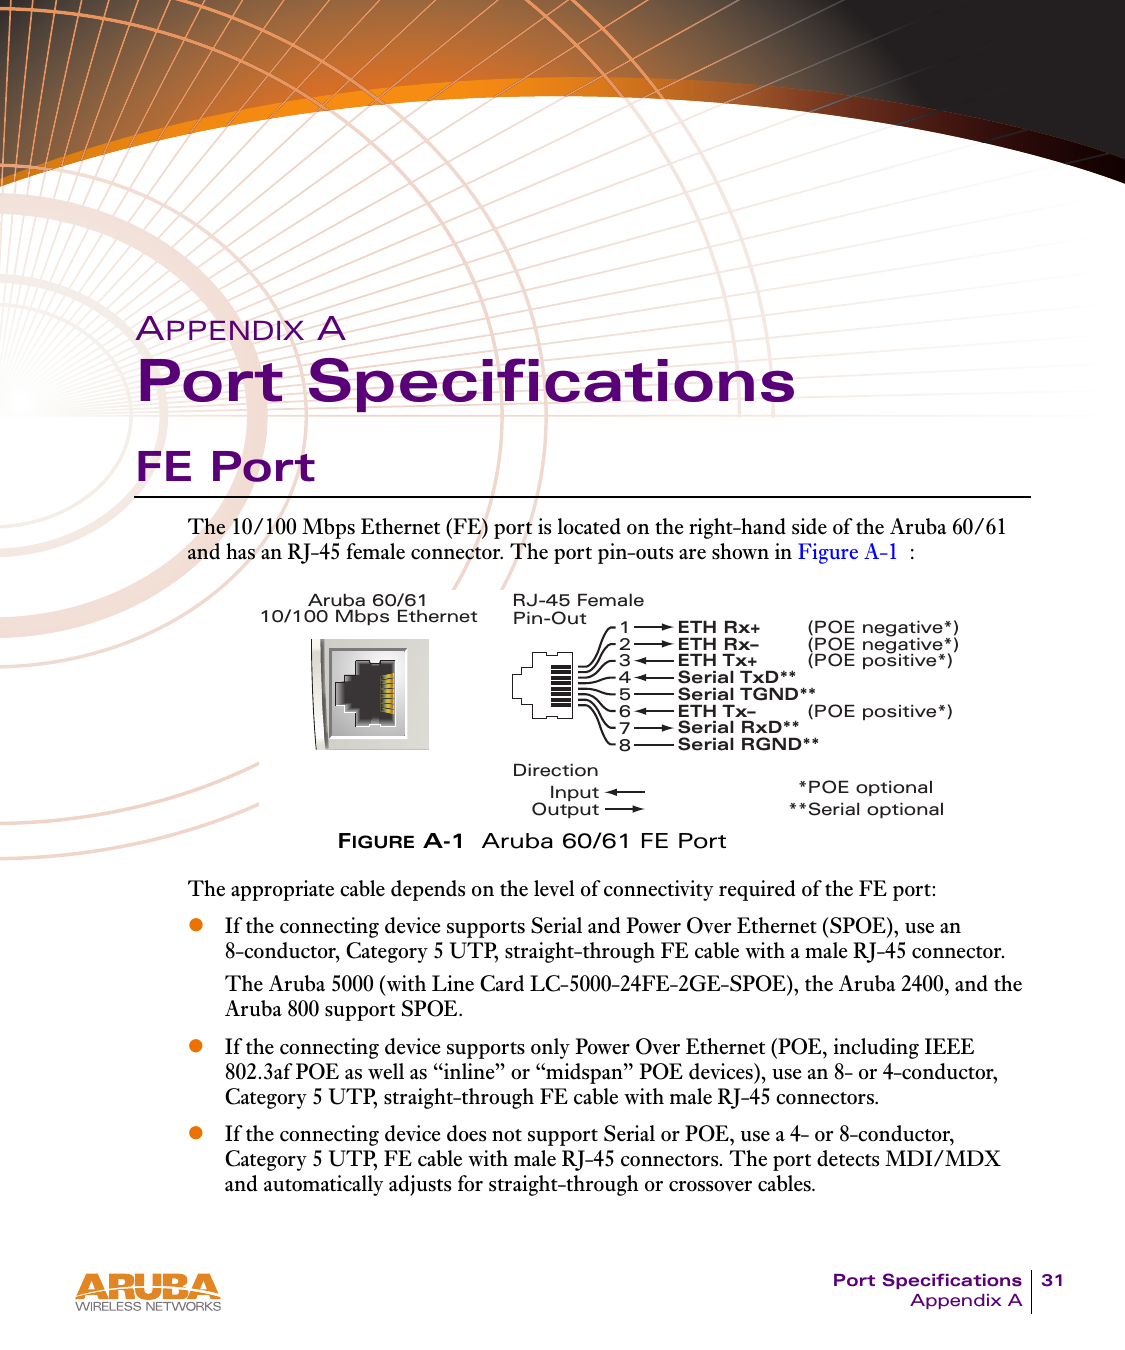 Port Specifications 31Appendix AAPPENDIX APort SpecificationsFE PortThe 10/100 Mbps Ethernet (FE) port is located on the right-hand side of the Aruba 60/61 and has an RJ-45 female connector. The port pin-outs are shown in Figure A-1 :FIGURE A-1 Aruba 60/61 FE PortThe appropriate cable depends on the level of connectivity required of the FE port:zIf the connecting device supports Serial and Power Over Ethernet (SPOE), use an 8-conductor, Category 5 UTP, straight-through FE cable with a male RJ-45 connector.The Aruba 5000 (with Line Card LC-5000-24FE-2GE-SPOE), the Aruba 2400, and the Aruba 800 support SPOE.zIf the connecting device supports only Power Over Ethernet (POE, including IEEE 802.3af POE as well as “inline” or “midspan” POE devices), use an 8- or 4-conductor, Category 5 UTP, straight-through FE cable with male RJ-45 connectors.zIf the connecting device does not support Serial or POE, use a 4- or 8-conductor, Category 5 UTP, FE cable with male RJ-45 connectors. The port detects MDI/MDX and automatically adjusts for straight-through or crossover cables.Aruba 60/6110/100 Mbps EthernetRJ-45 FemalePin-Out*POE optional**Serial optionalSerial TxD**Serial TGND**Serial RxD**Serial RGND**12345678ETH Rx+ (POE negative*)ETH Rx– (POE negative*)ETH Tx+ (POE positive*)ETH Tx– (POE positive*)DirectionInputOutput